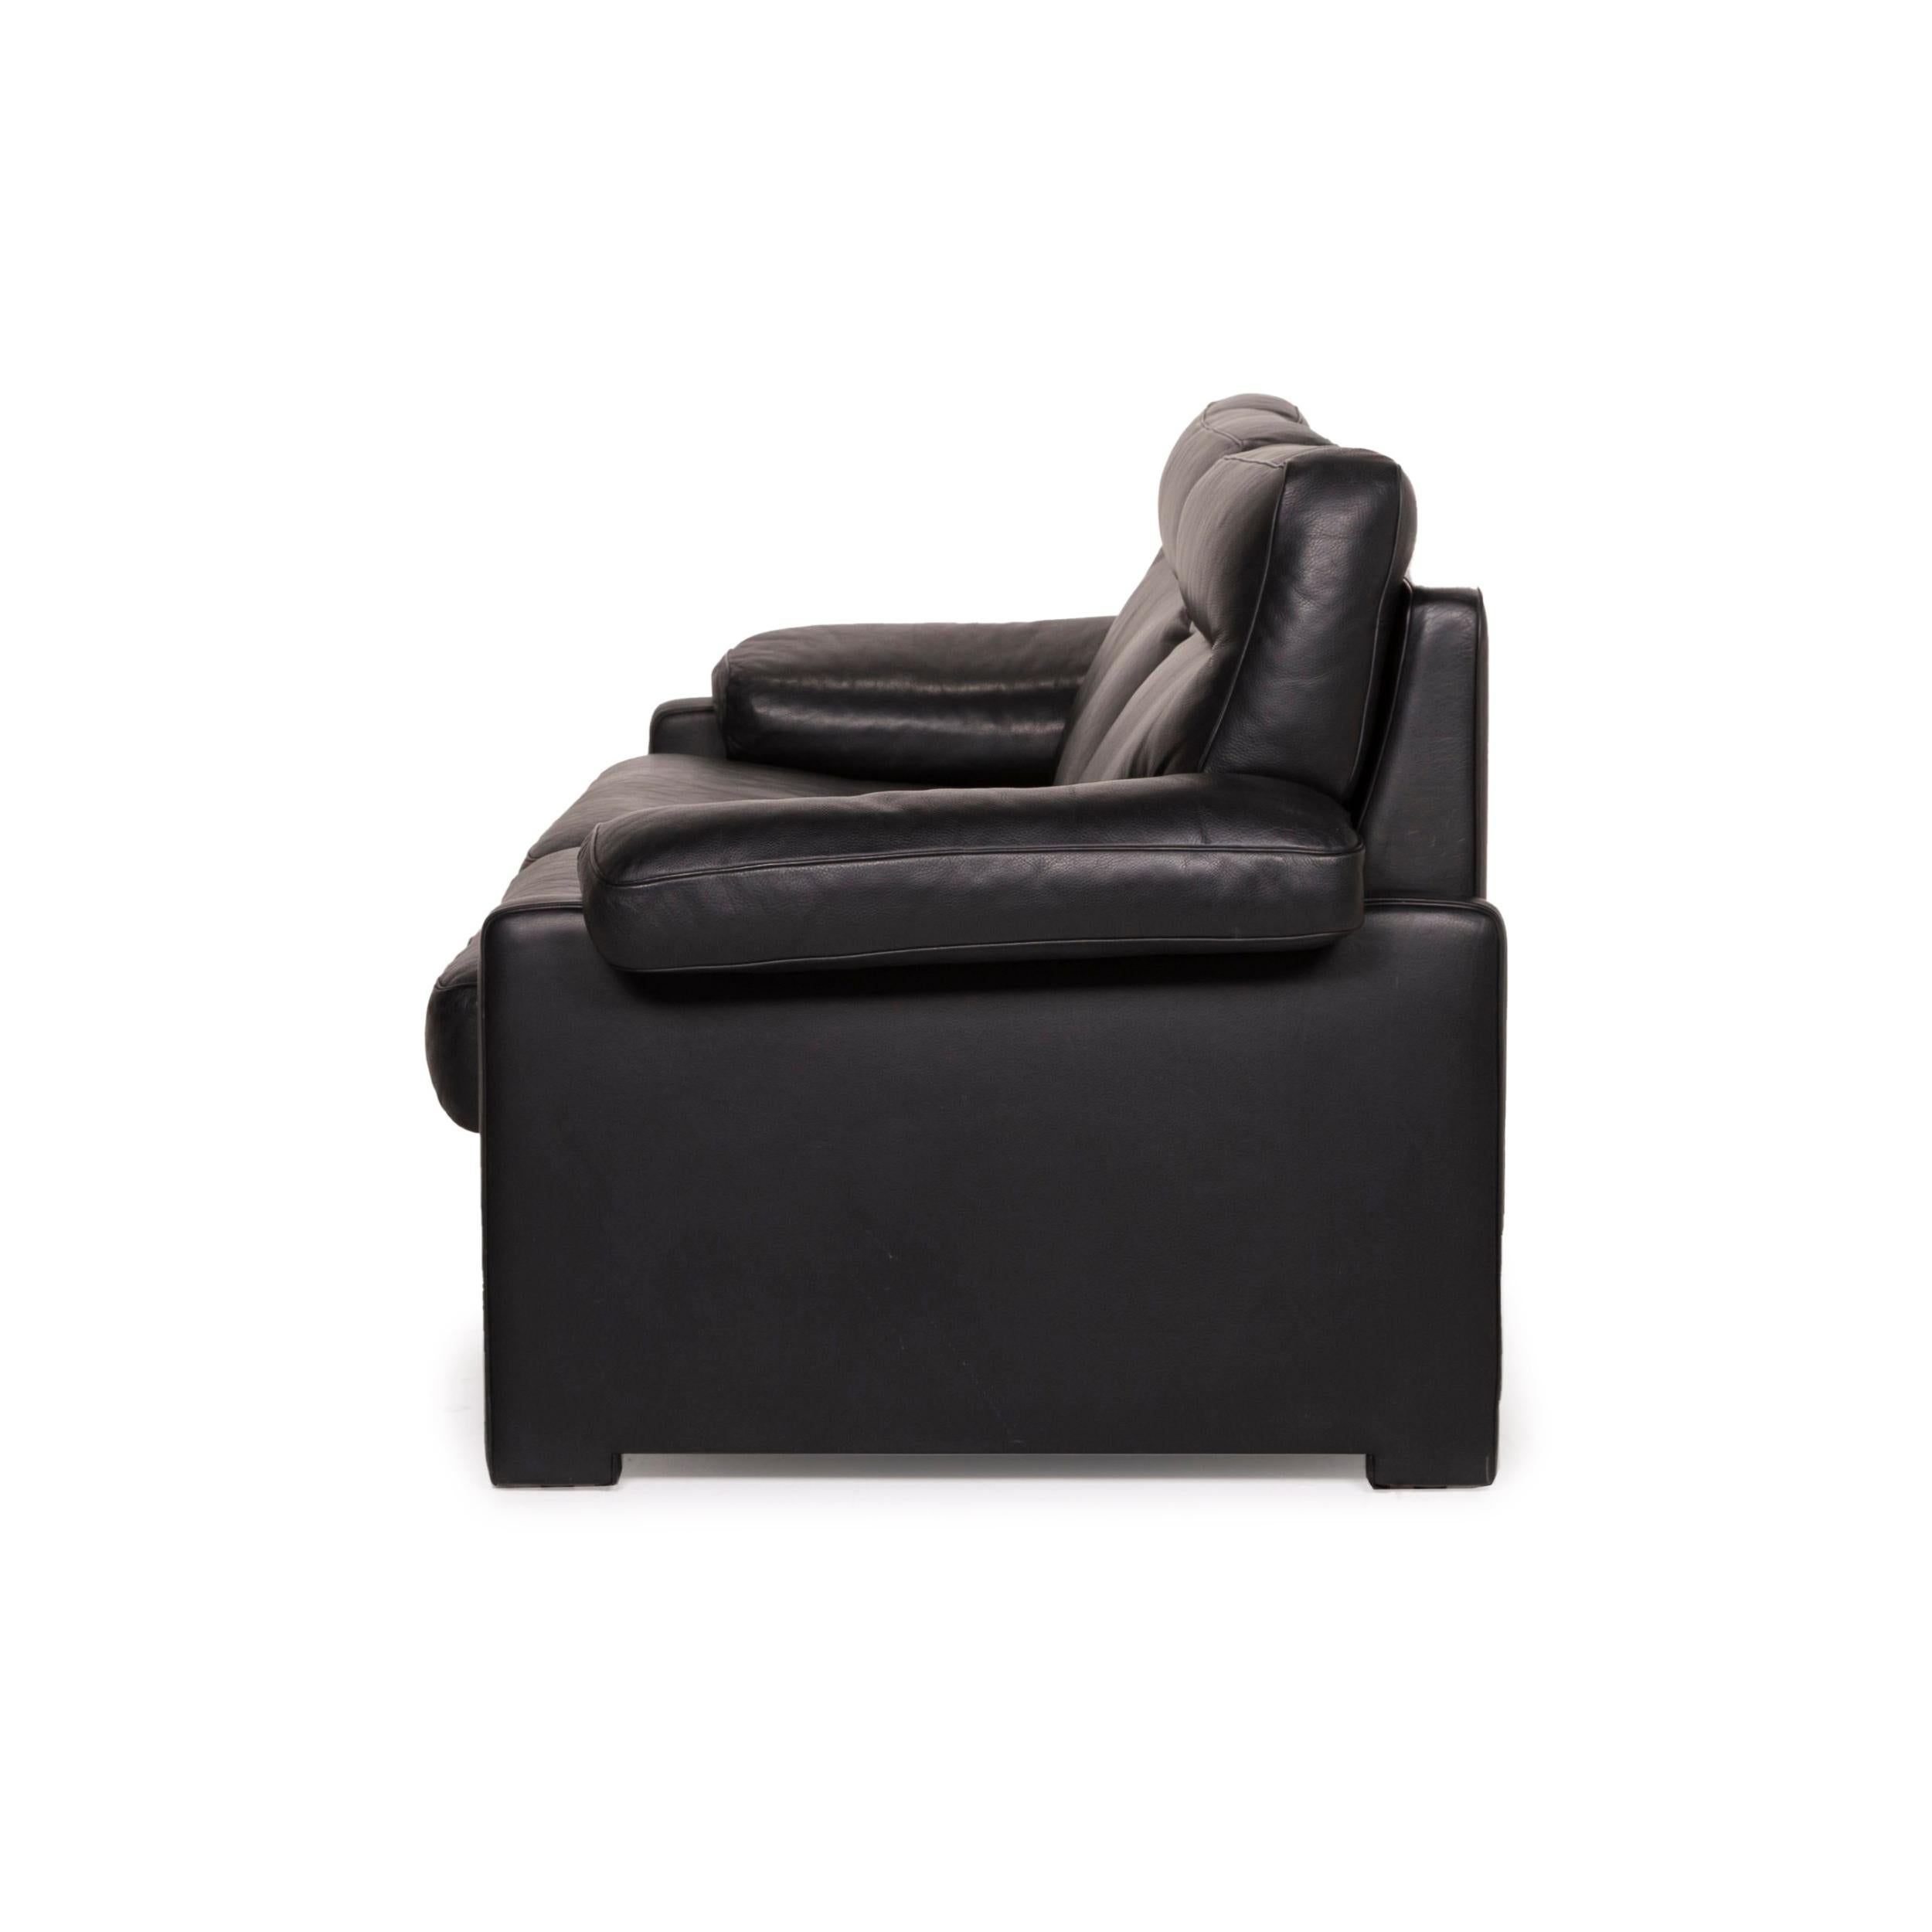 De Sede Ds 70 Leather Sofa Set Black 1x Three-Seater 1x Two-Seater Set For Sale 5